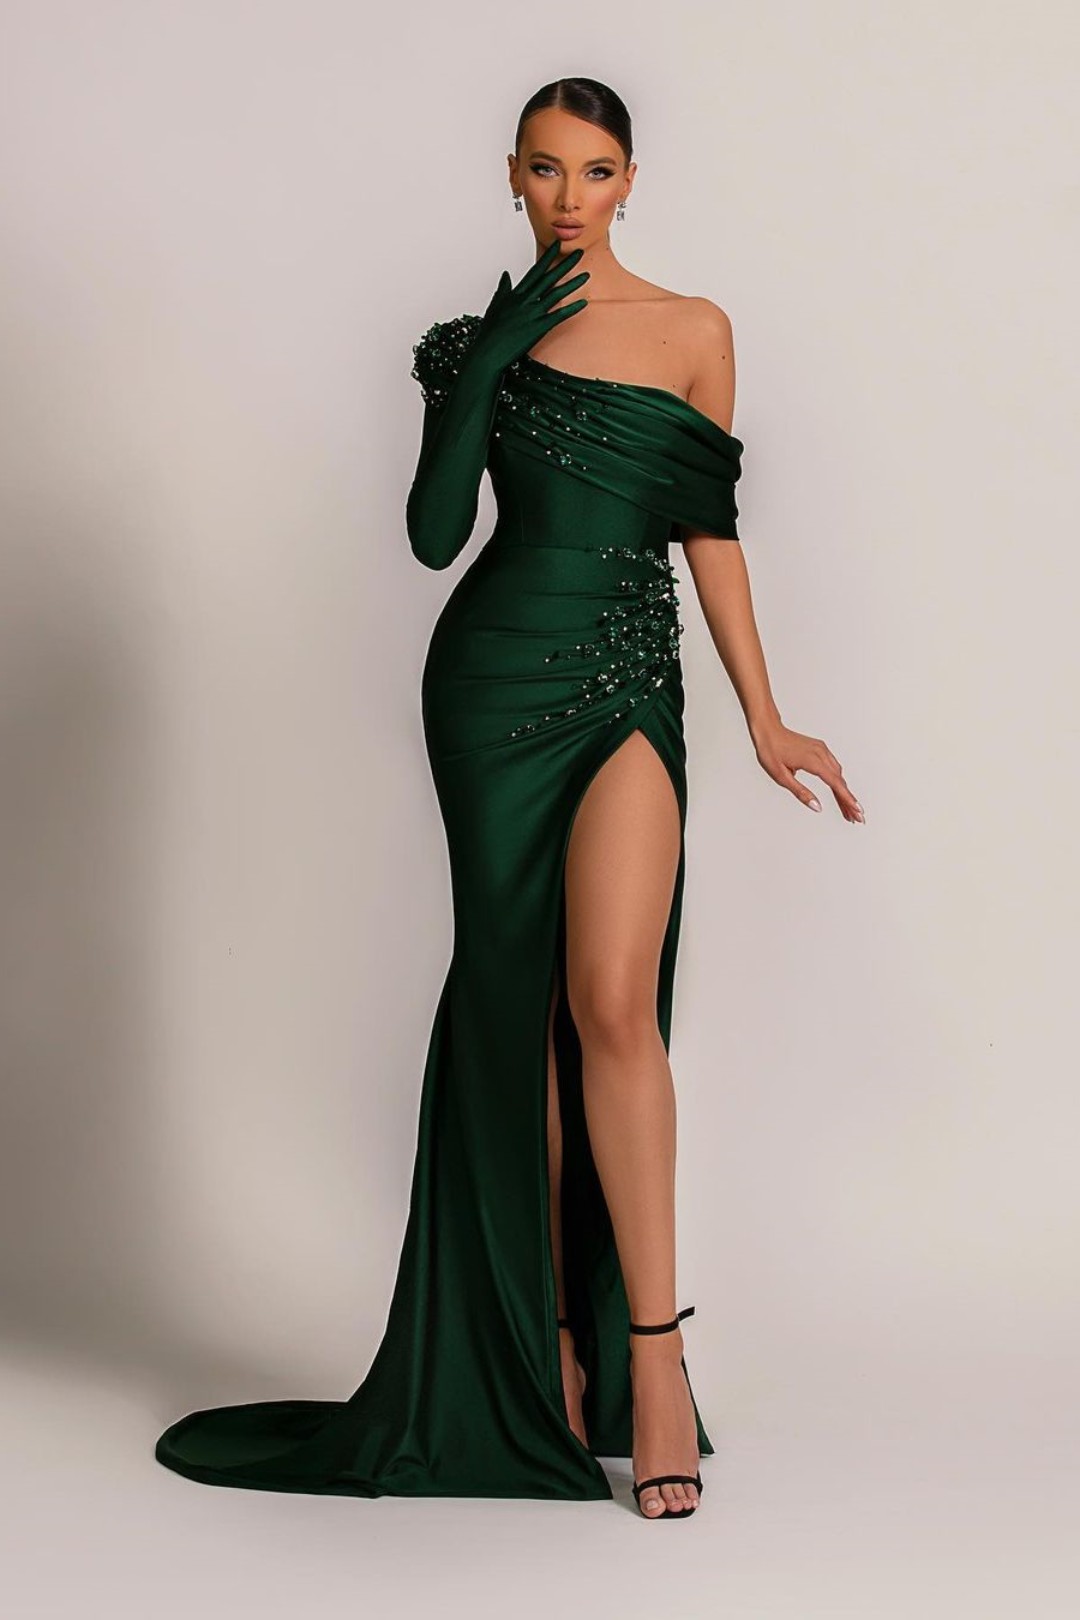 Emerald Green Evening Dress One Shoulder With Pearl Split YL0148